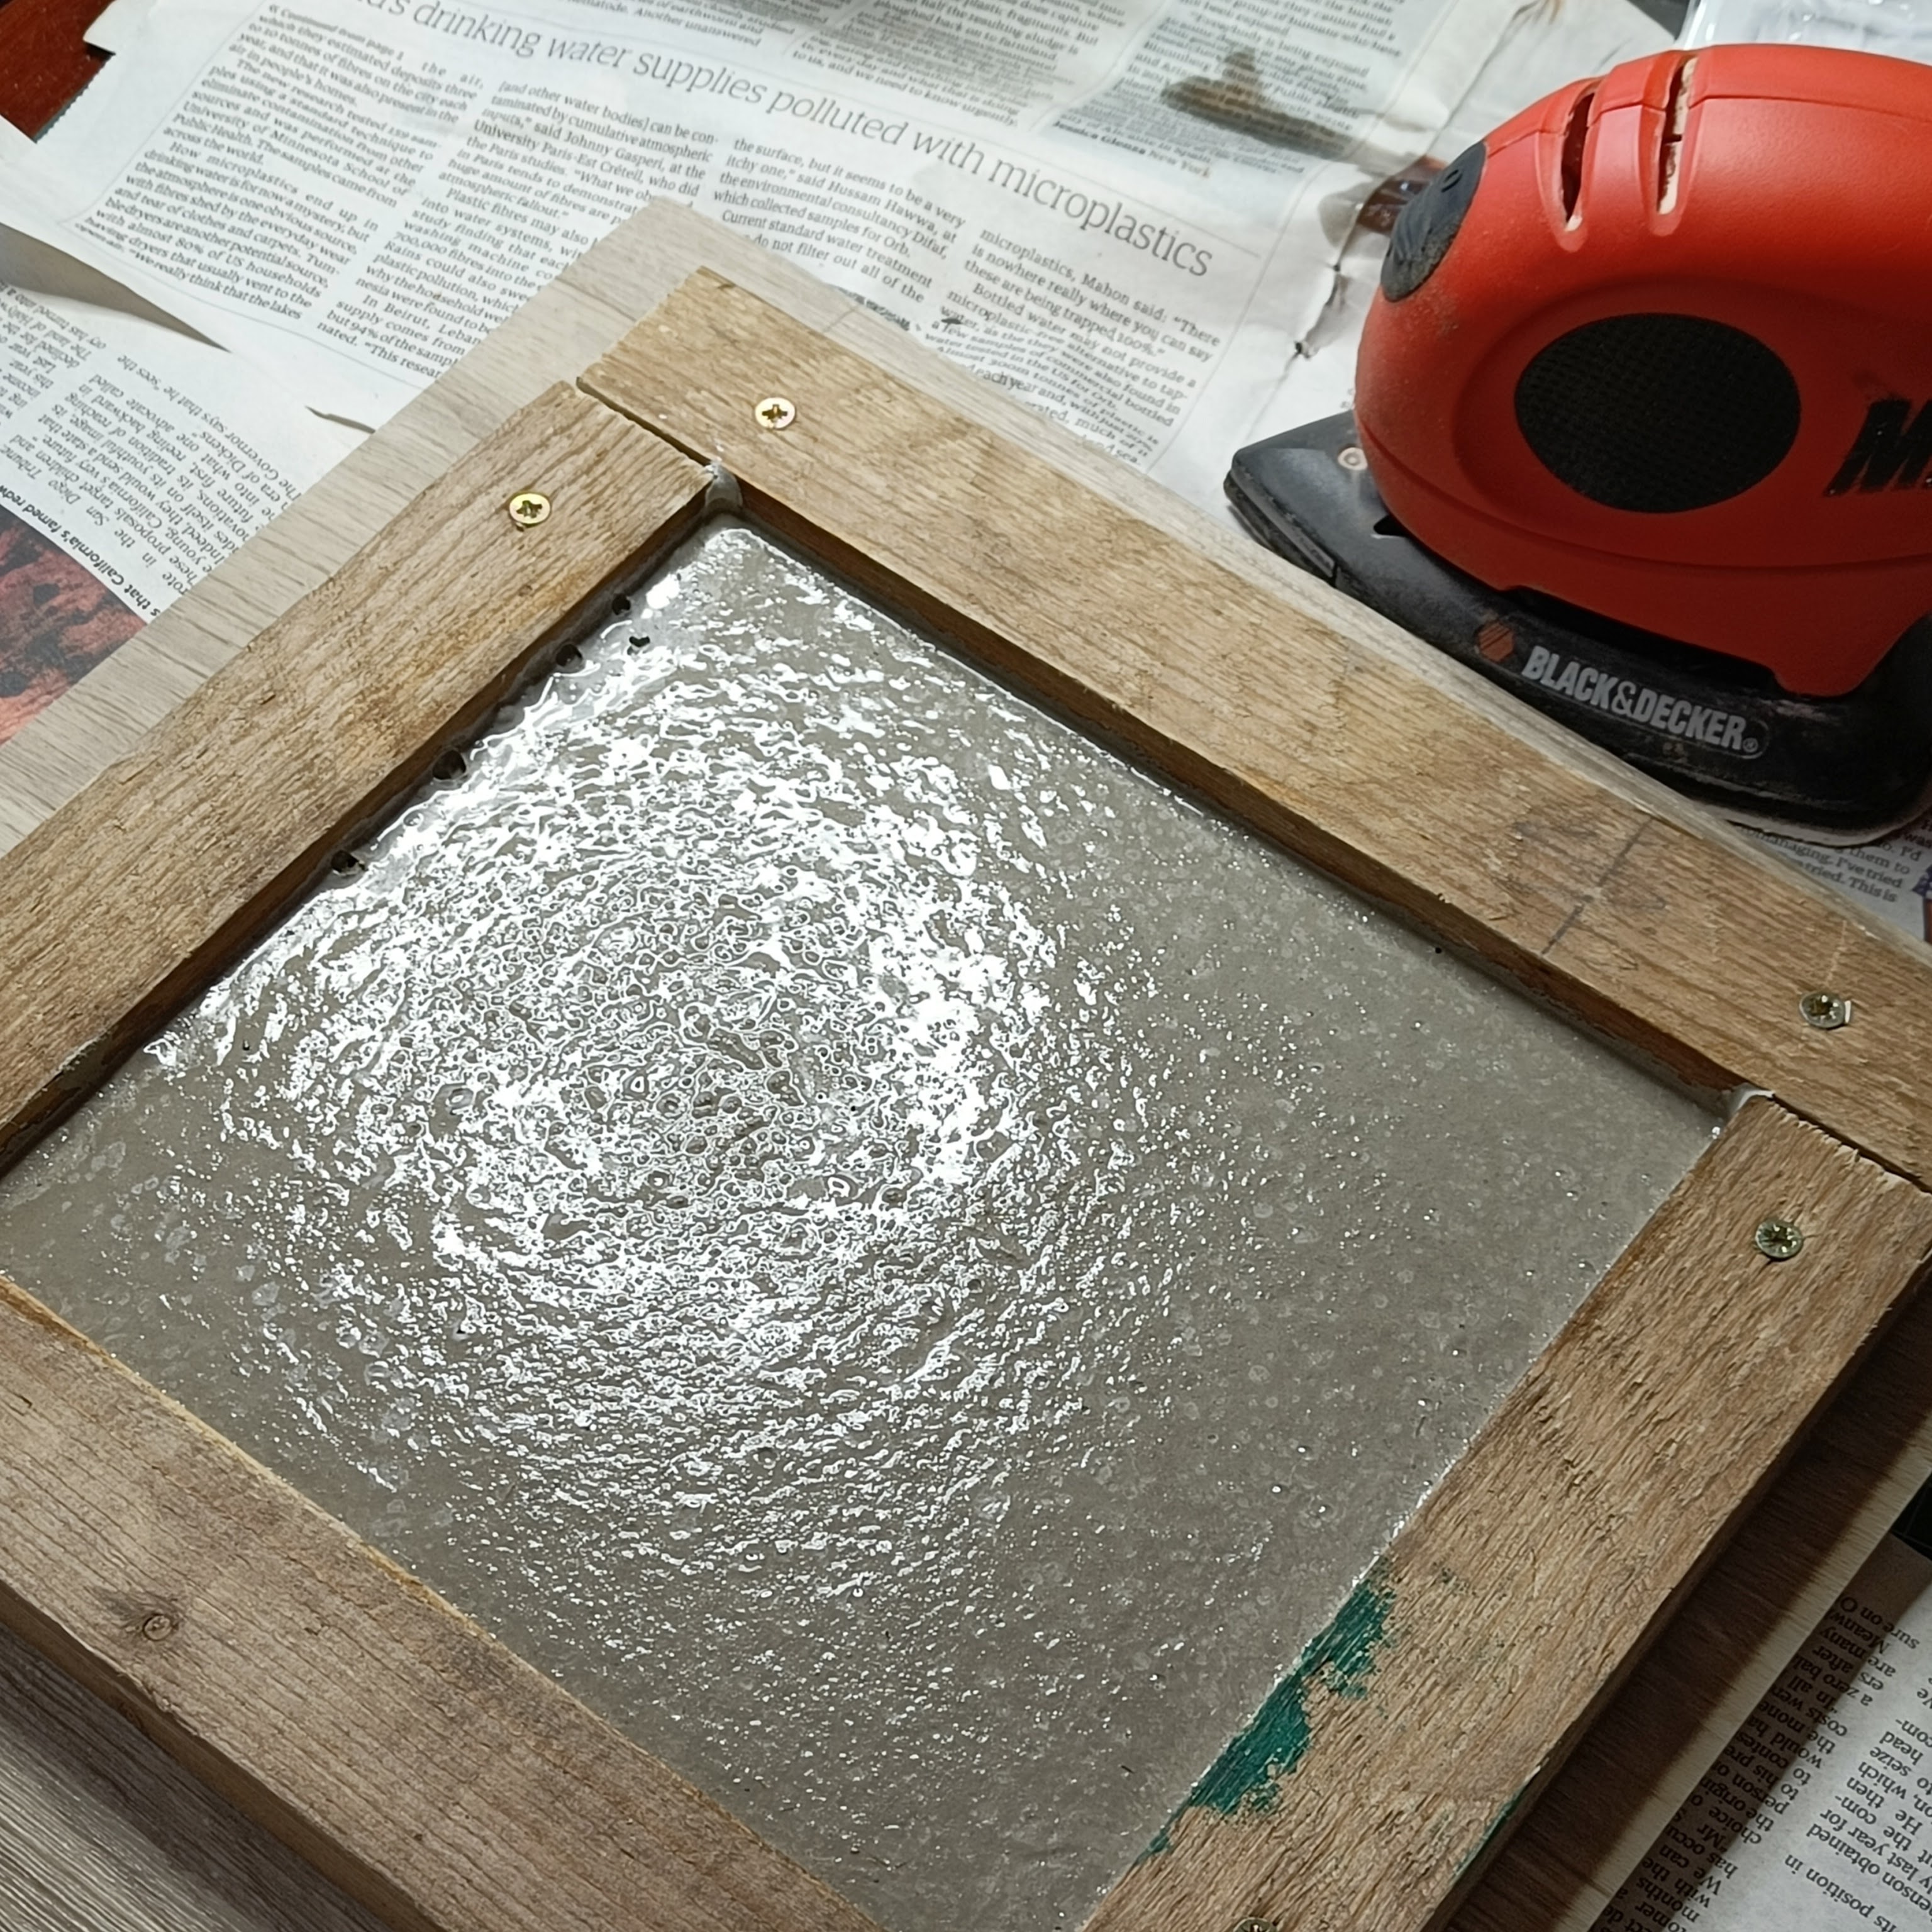 magically, the surface of the concrete in the frame has
  been made level and appears with that wet slightly bubbly
  texture that is familiar from movies scenes where someone is
  about to step into wet concrete. The mouse sander responsible
  for the vibrating that made this happen rests nearby.